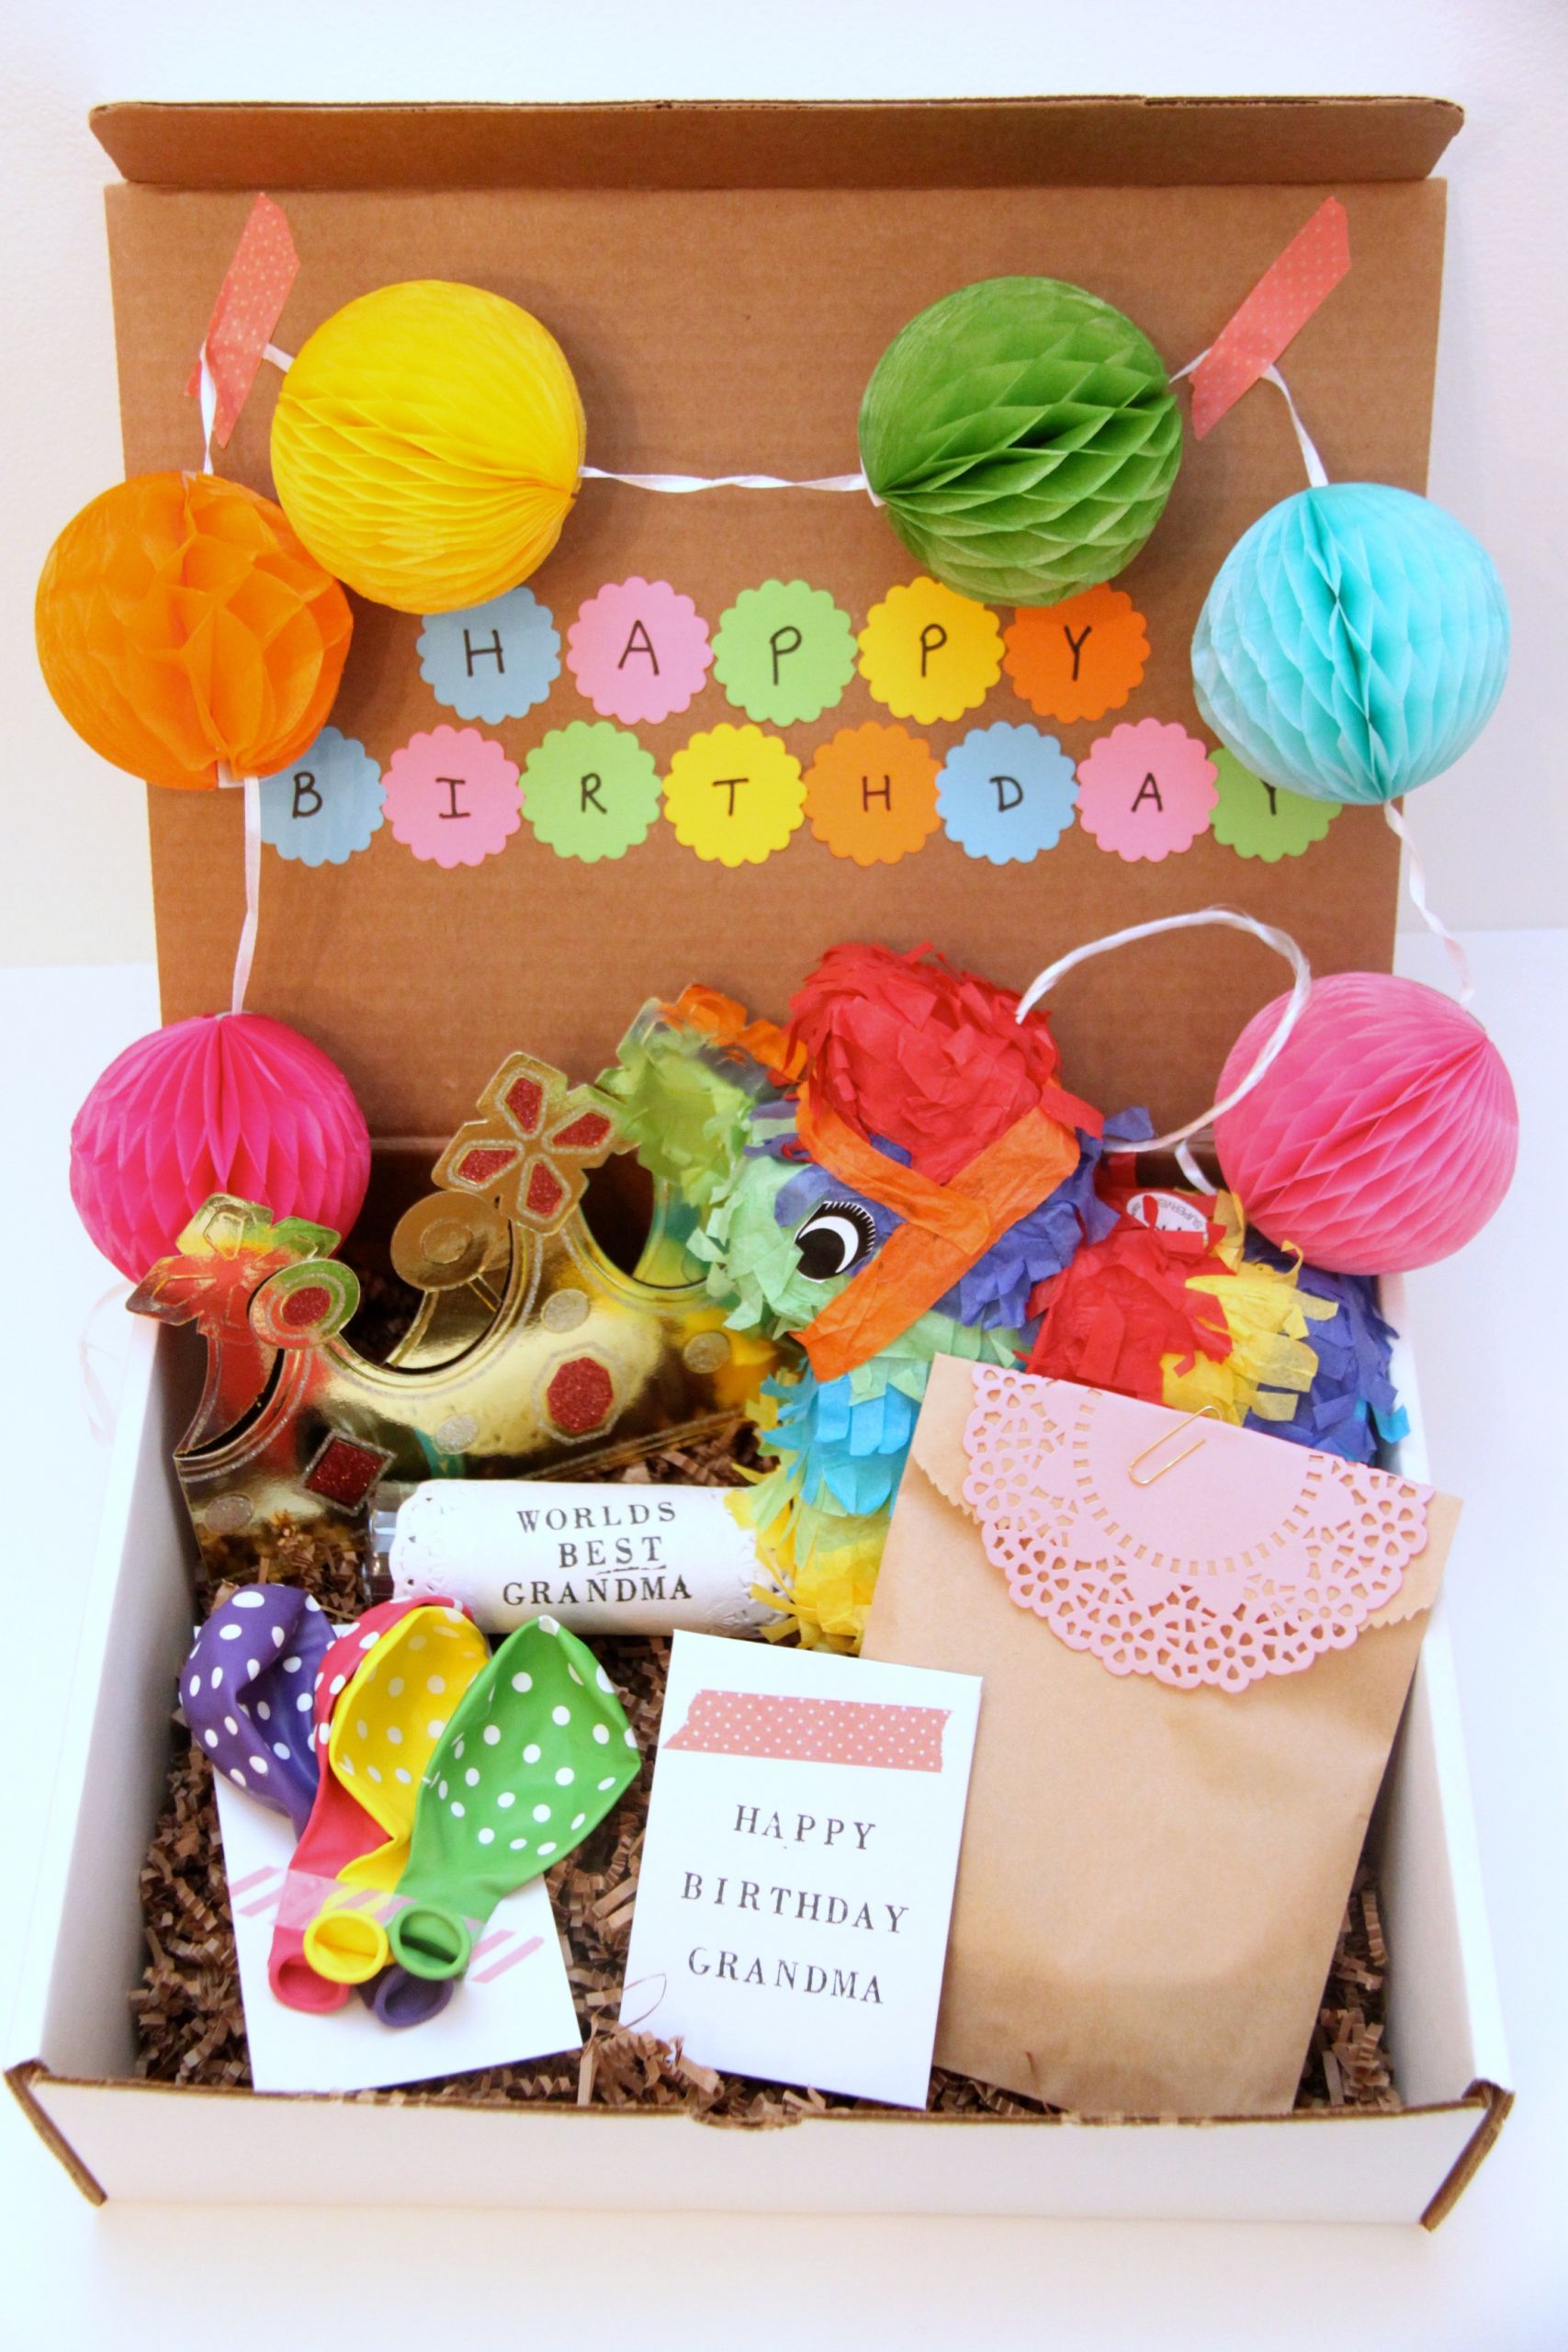 Birthday Party Gift Ideas
 A Birthday In a Box Gift for Grandma Smashed Peas & Carrots